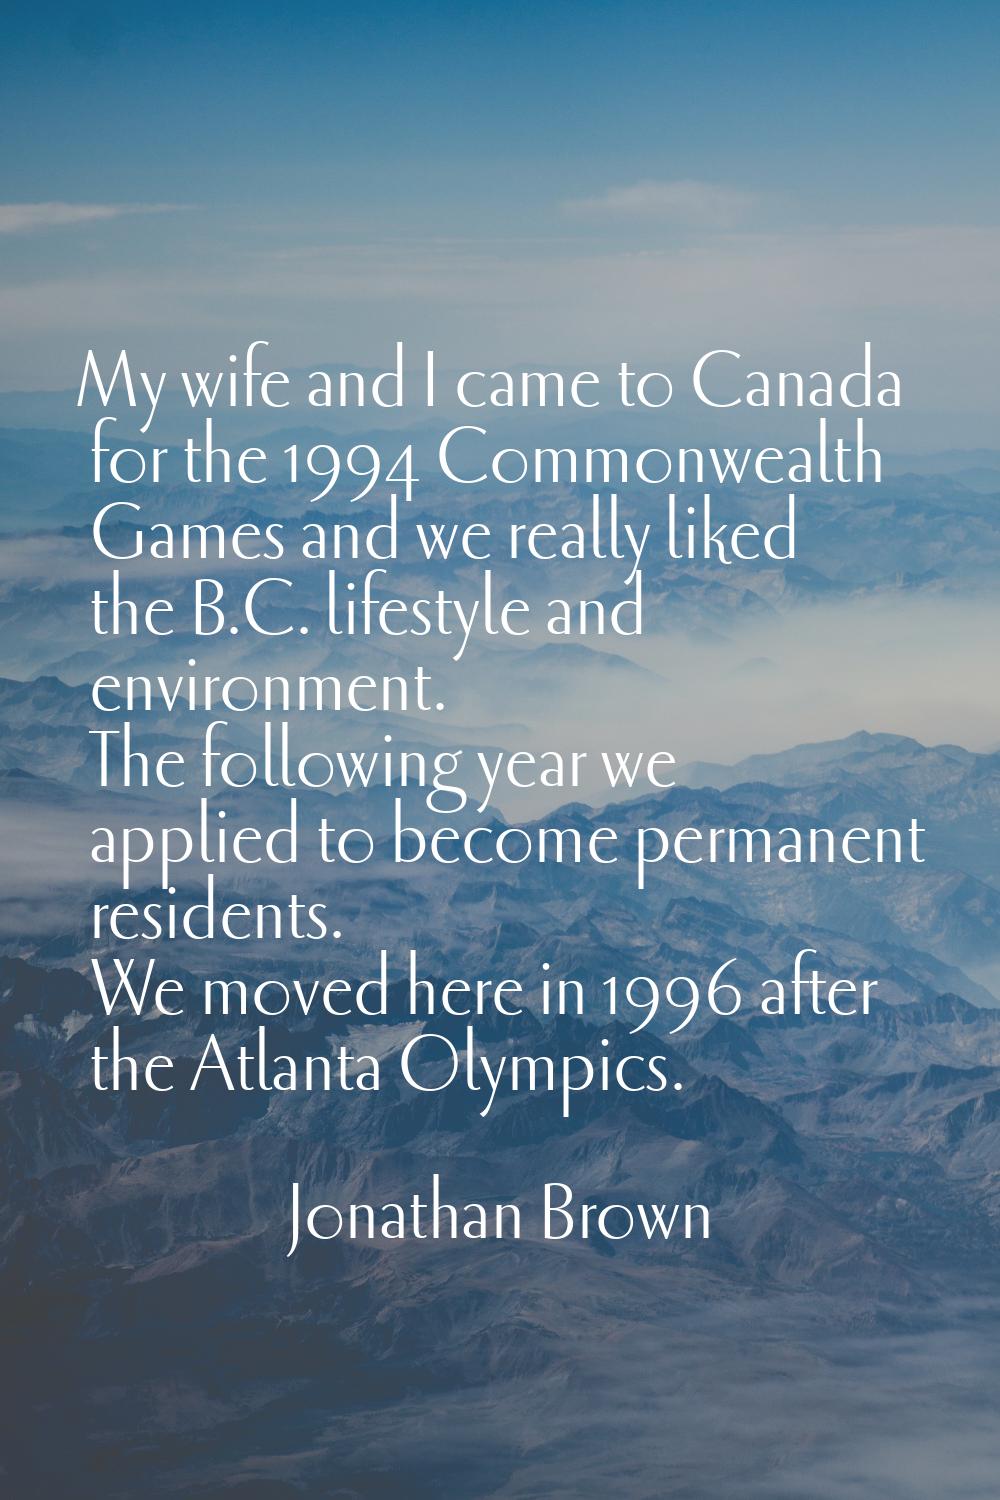 My wife and I came to Canada for the 1994 Commonwealth Games and we really liked the B.C. lifestyle